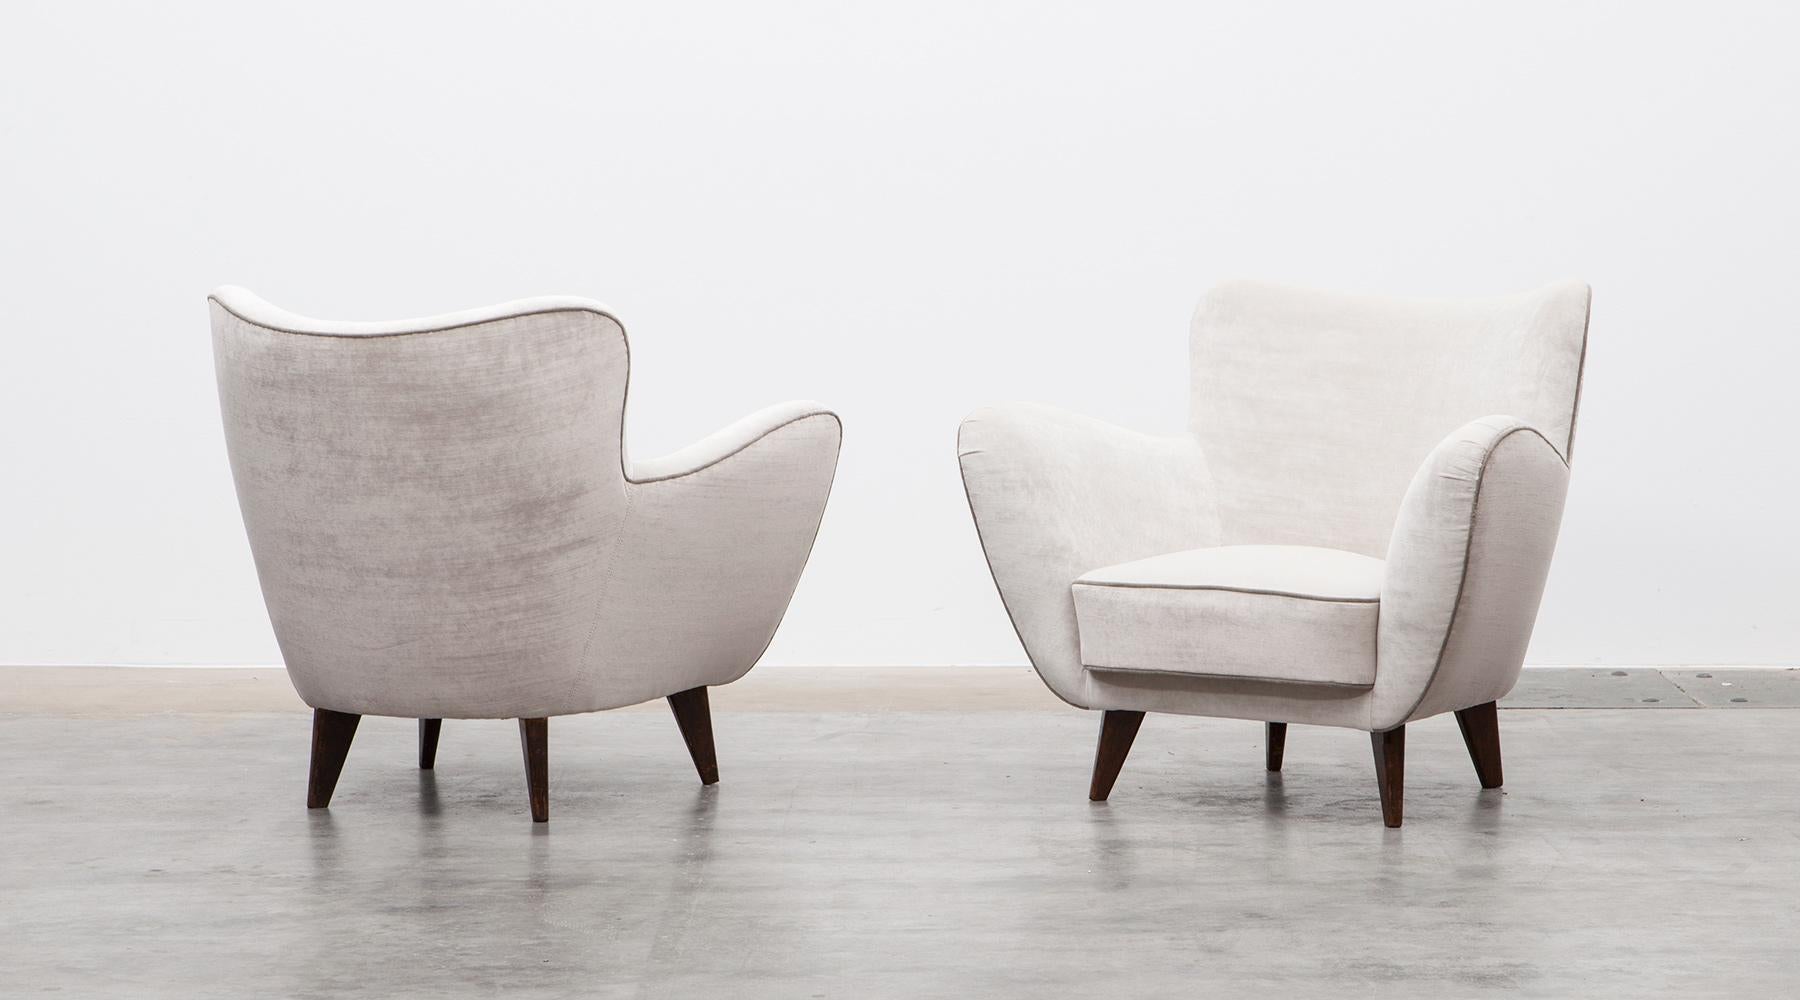 New upholstery in white high-quality fabric, lounge chairs by Guglielmo Veronesi, Italy, 1950.

A pair of lounge chairs designed by Guglielmo Veronesi. Its sensual curves and the elegantly tapered legs give the chairs a sculptural and modern look